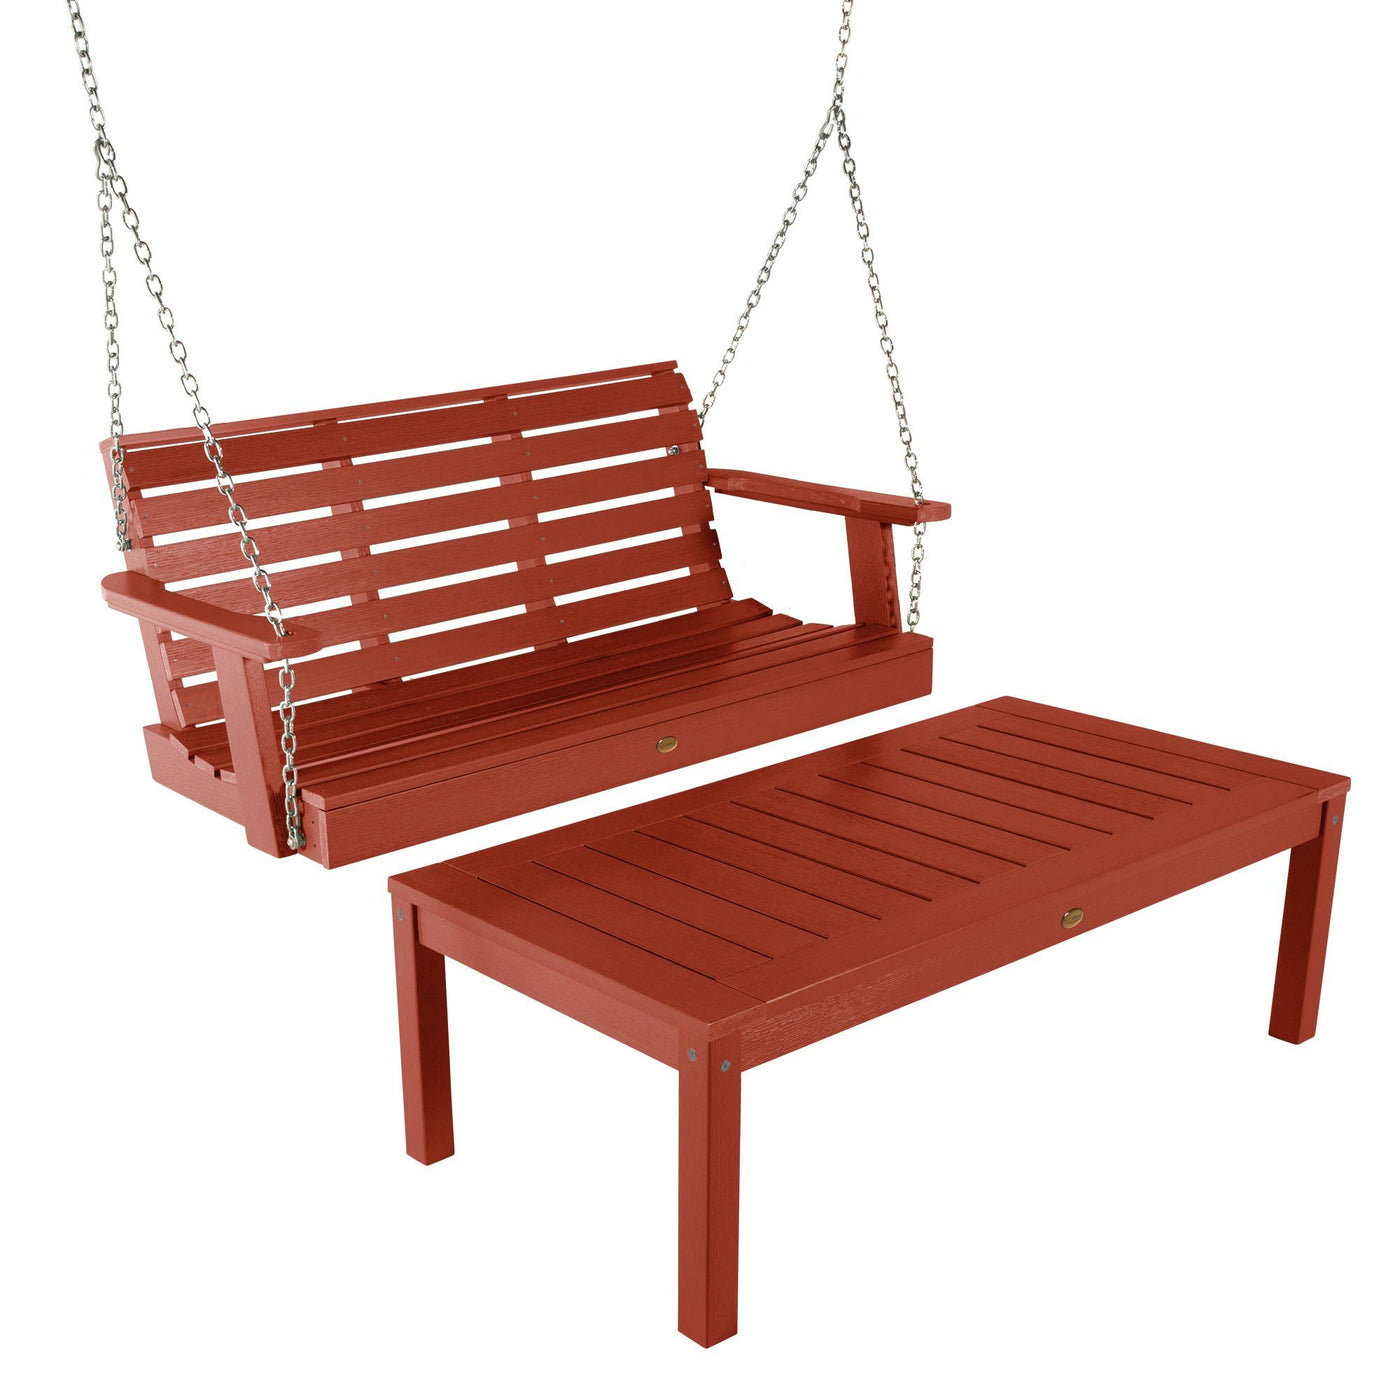 Weatherly 4ft Swing and Adirondack Coffee Table Kitted Sets Highwood USA Rustic Red 